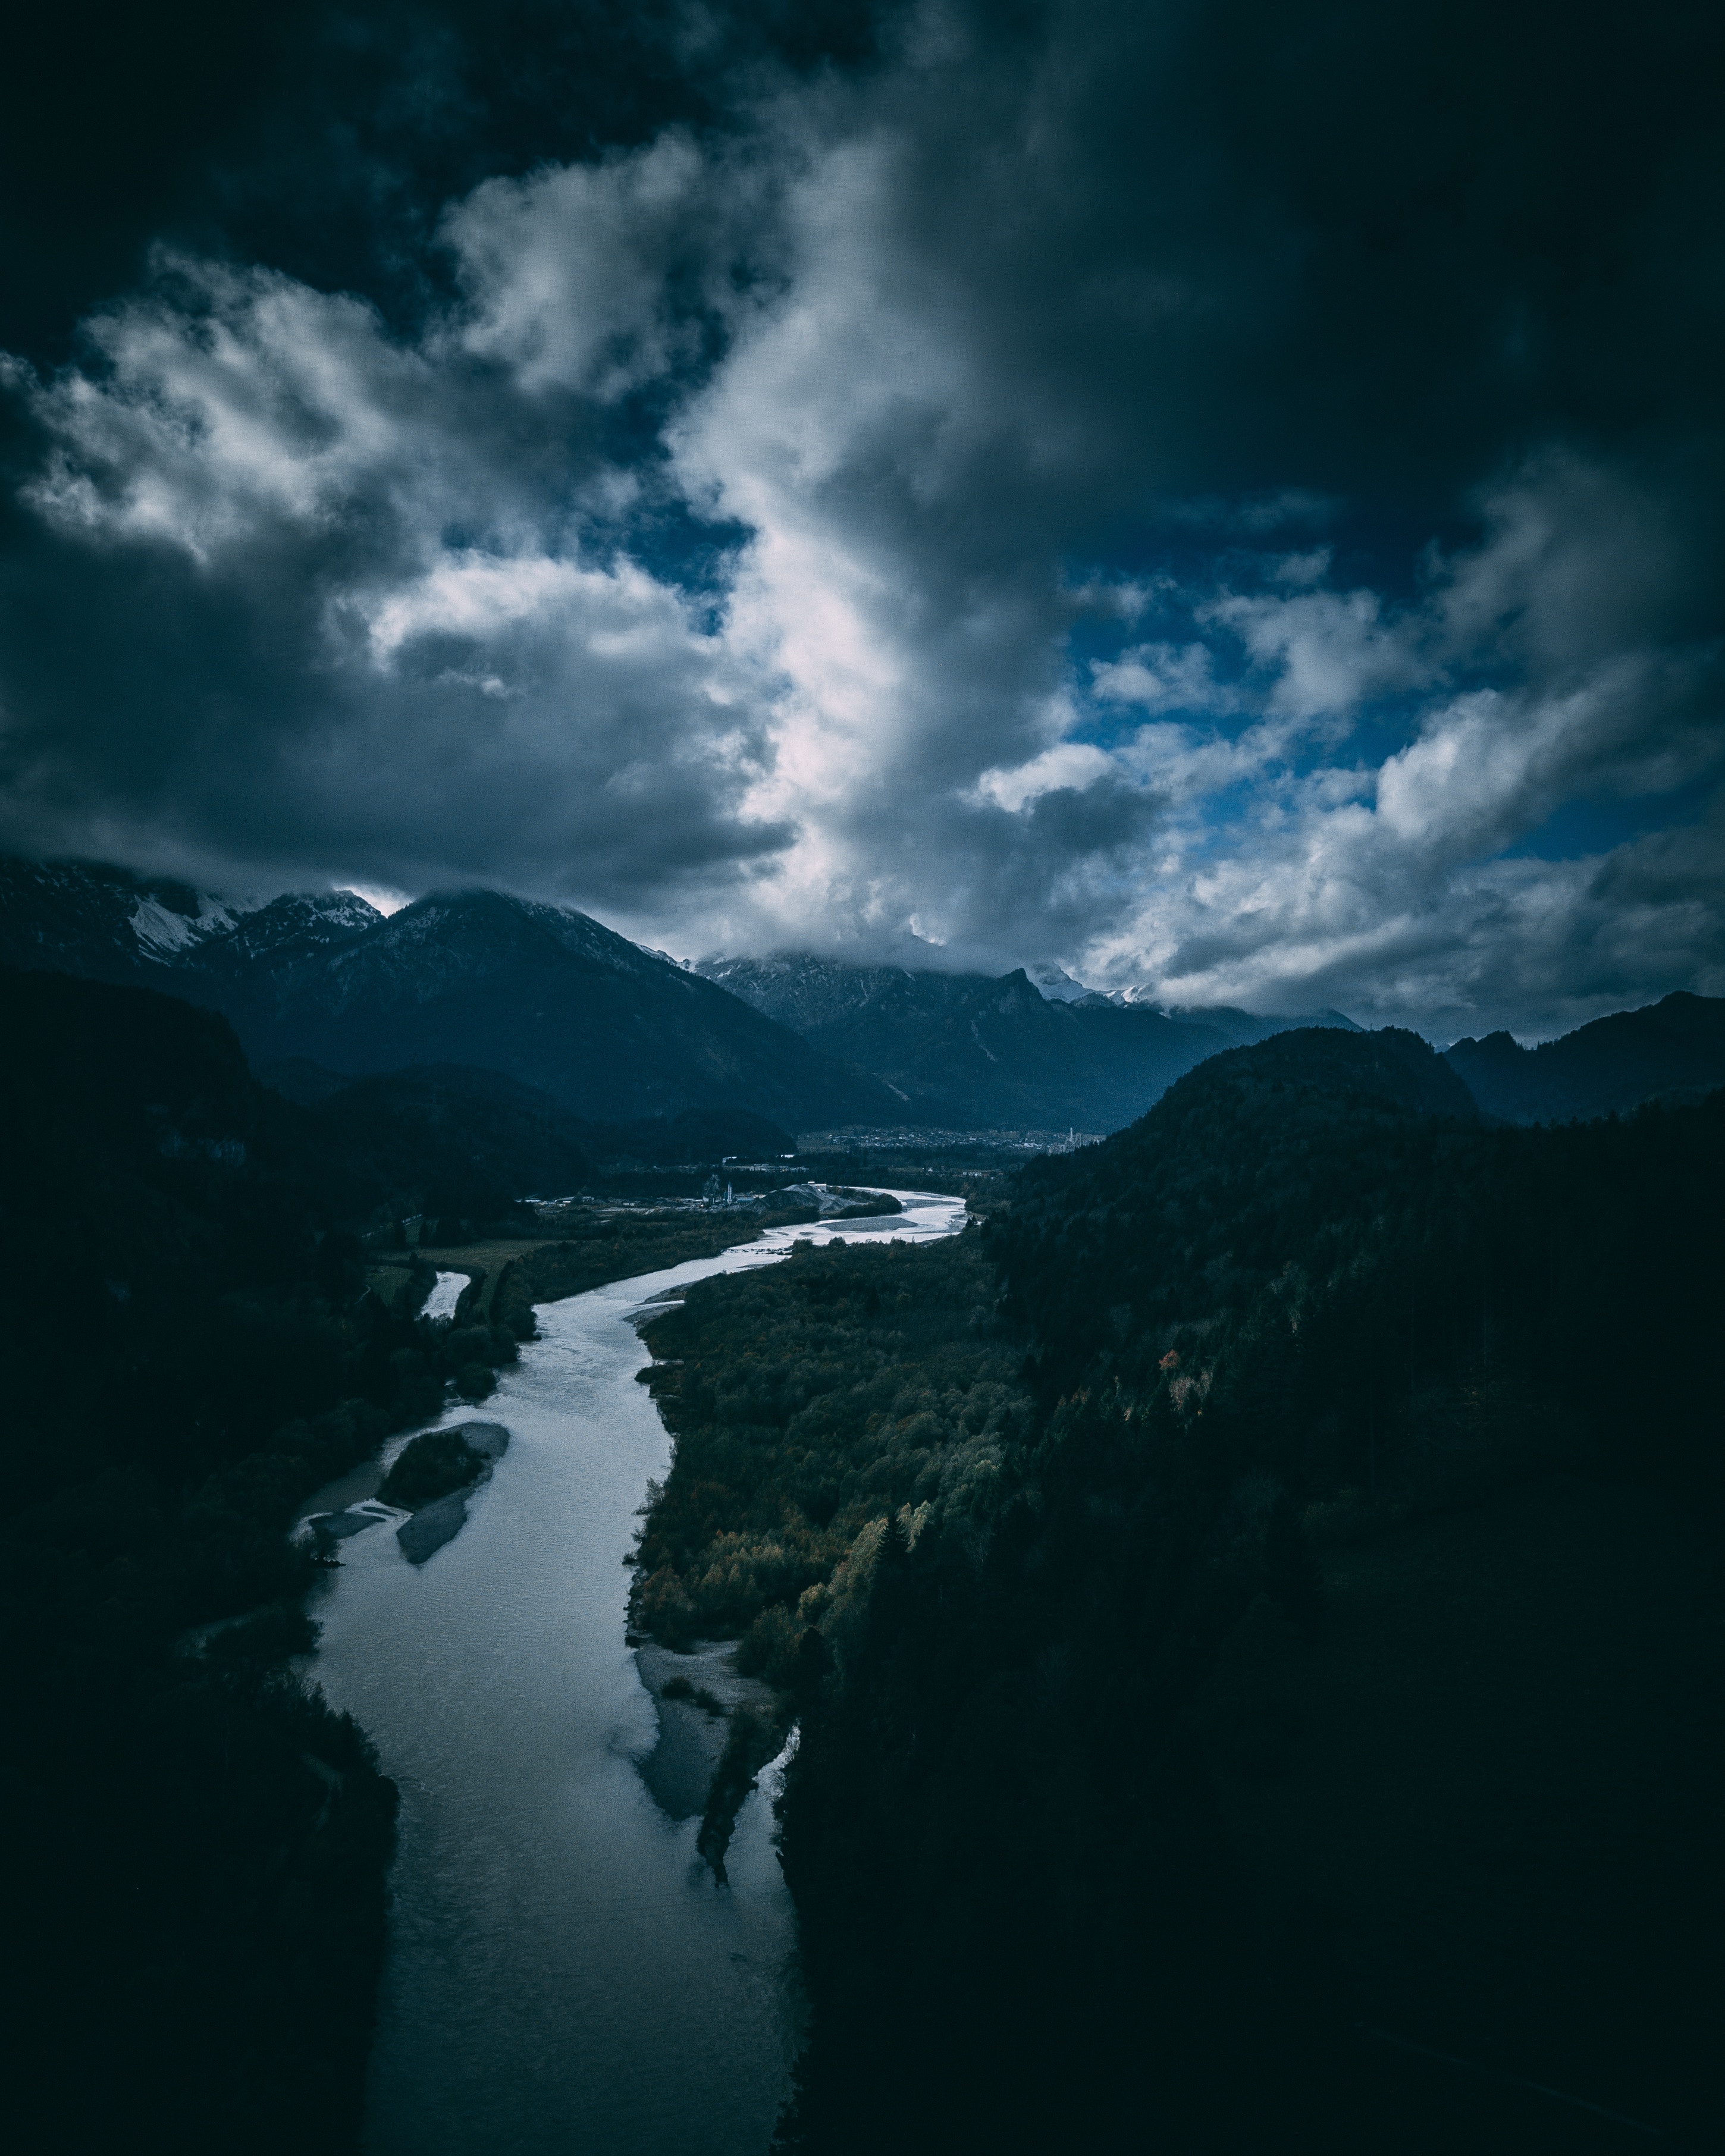 germany, trees, sky, clouds, nature, rivers, mountains, view from above iphone wallpaper